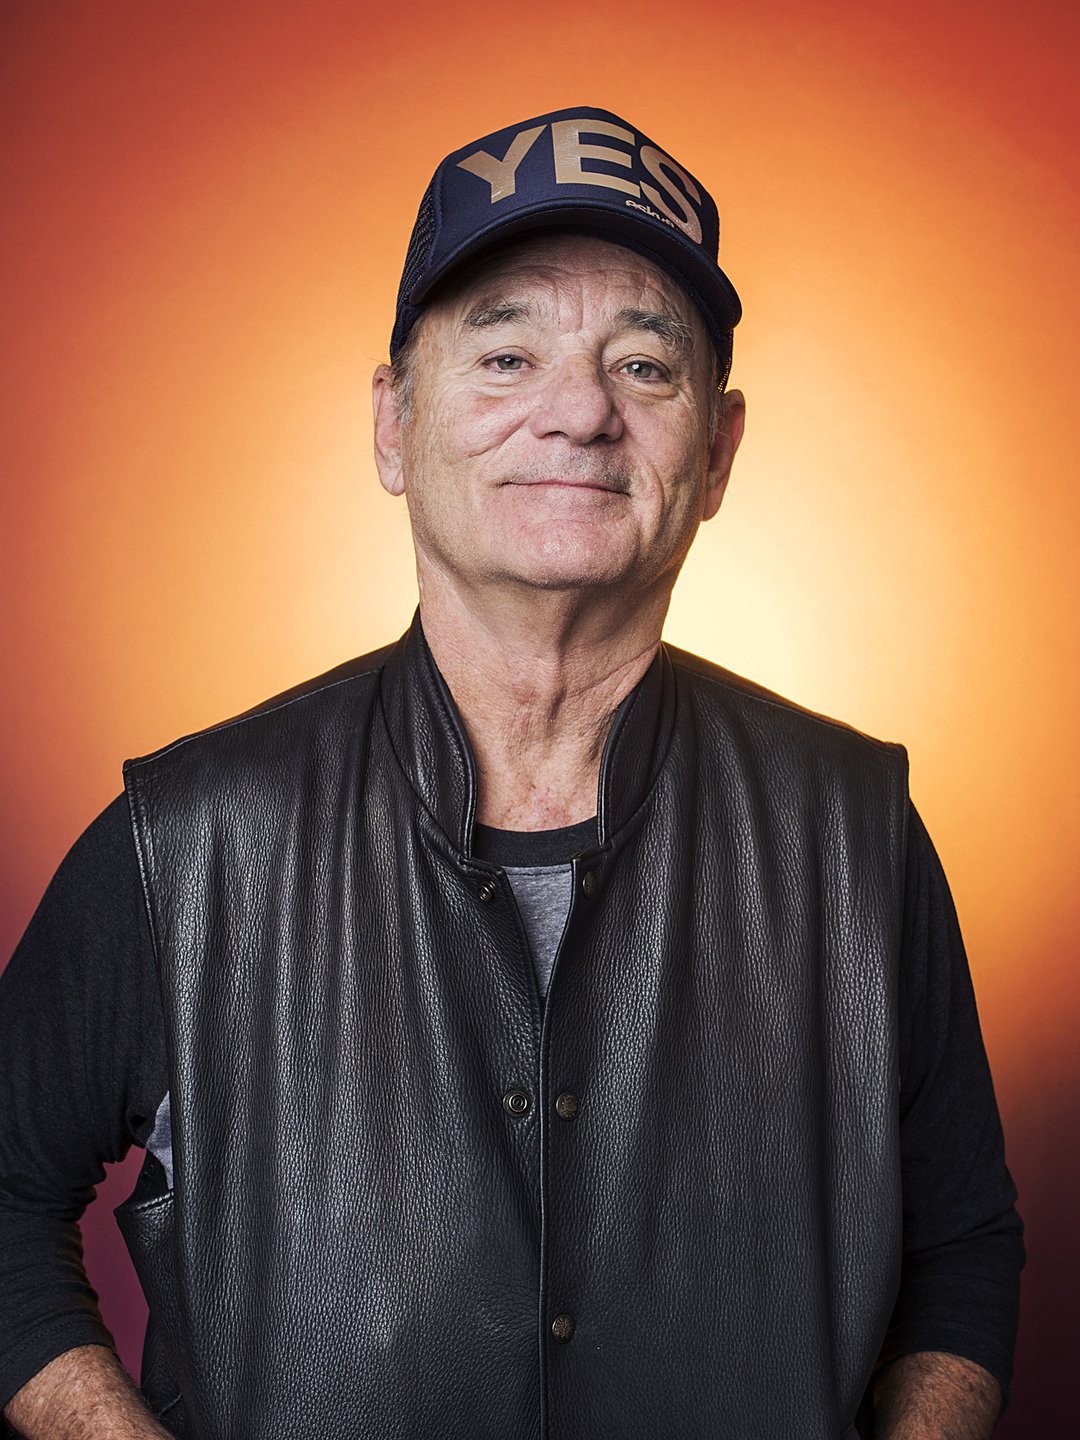 Bill Murray who is his father